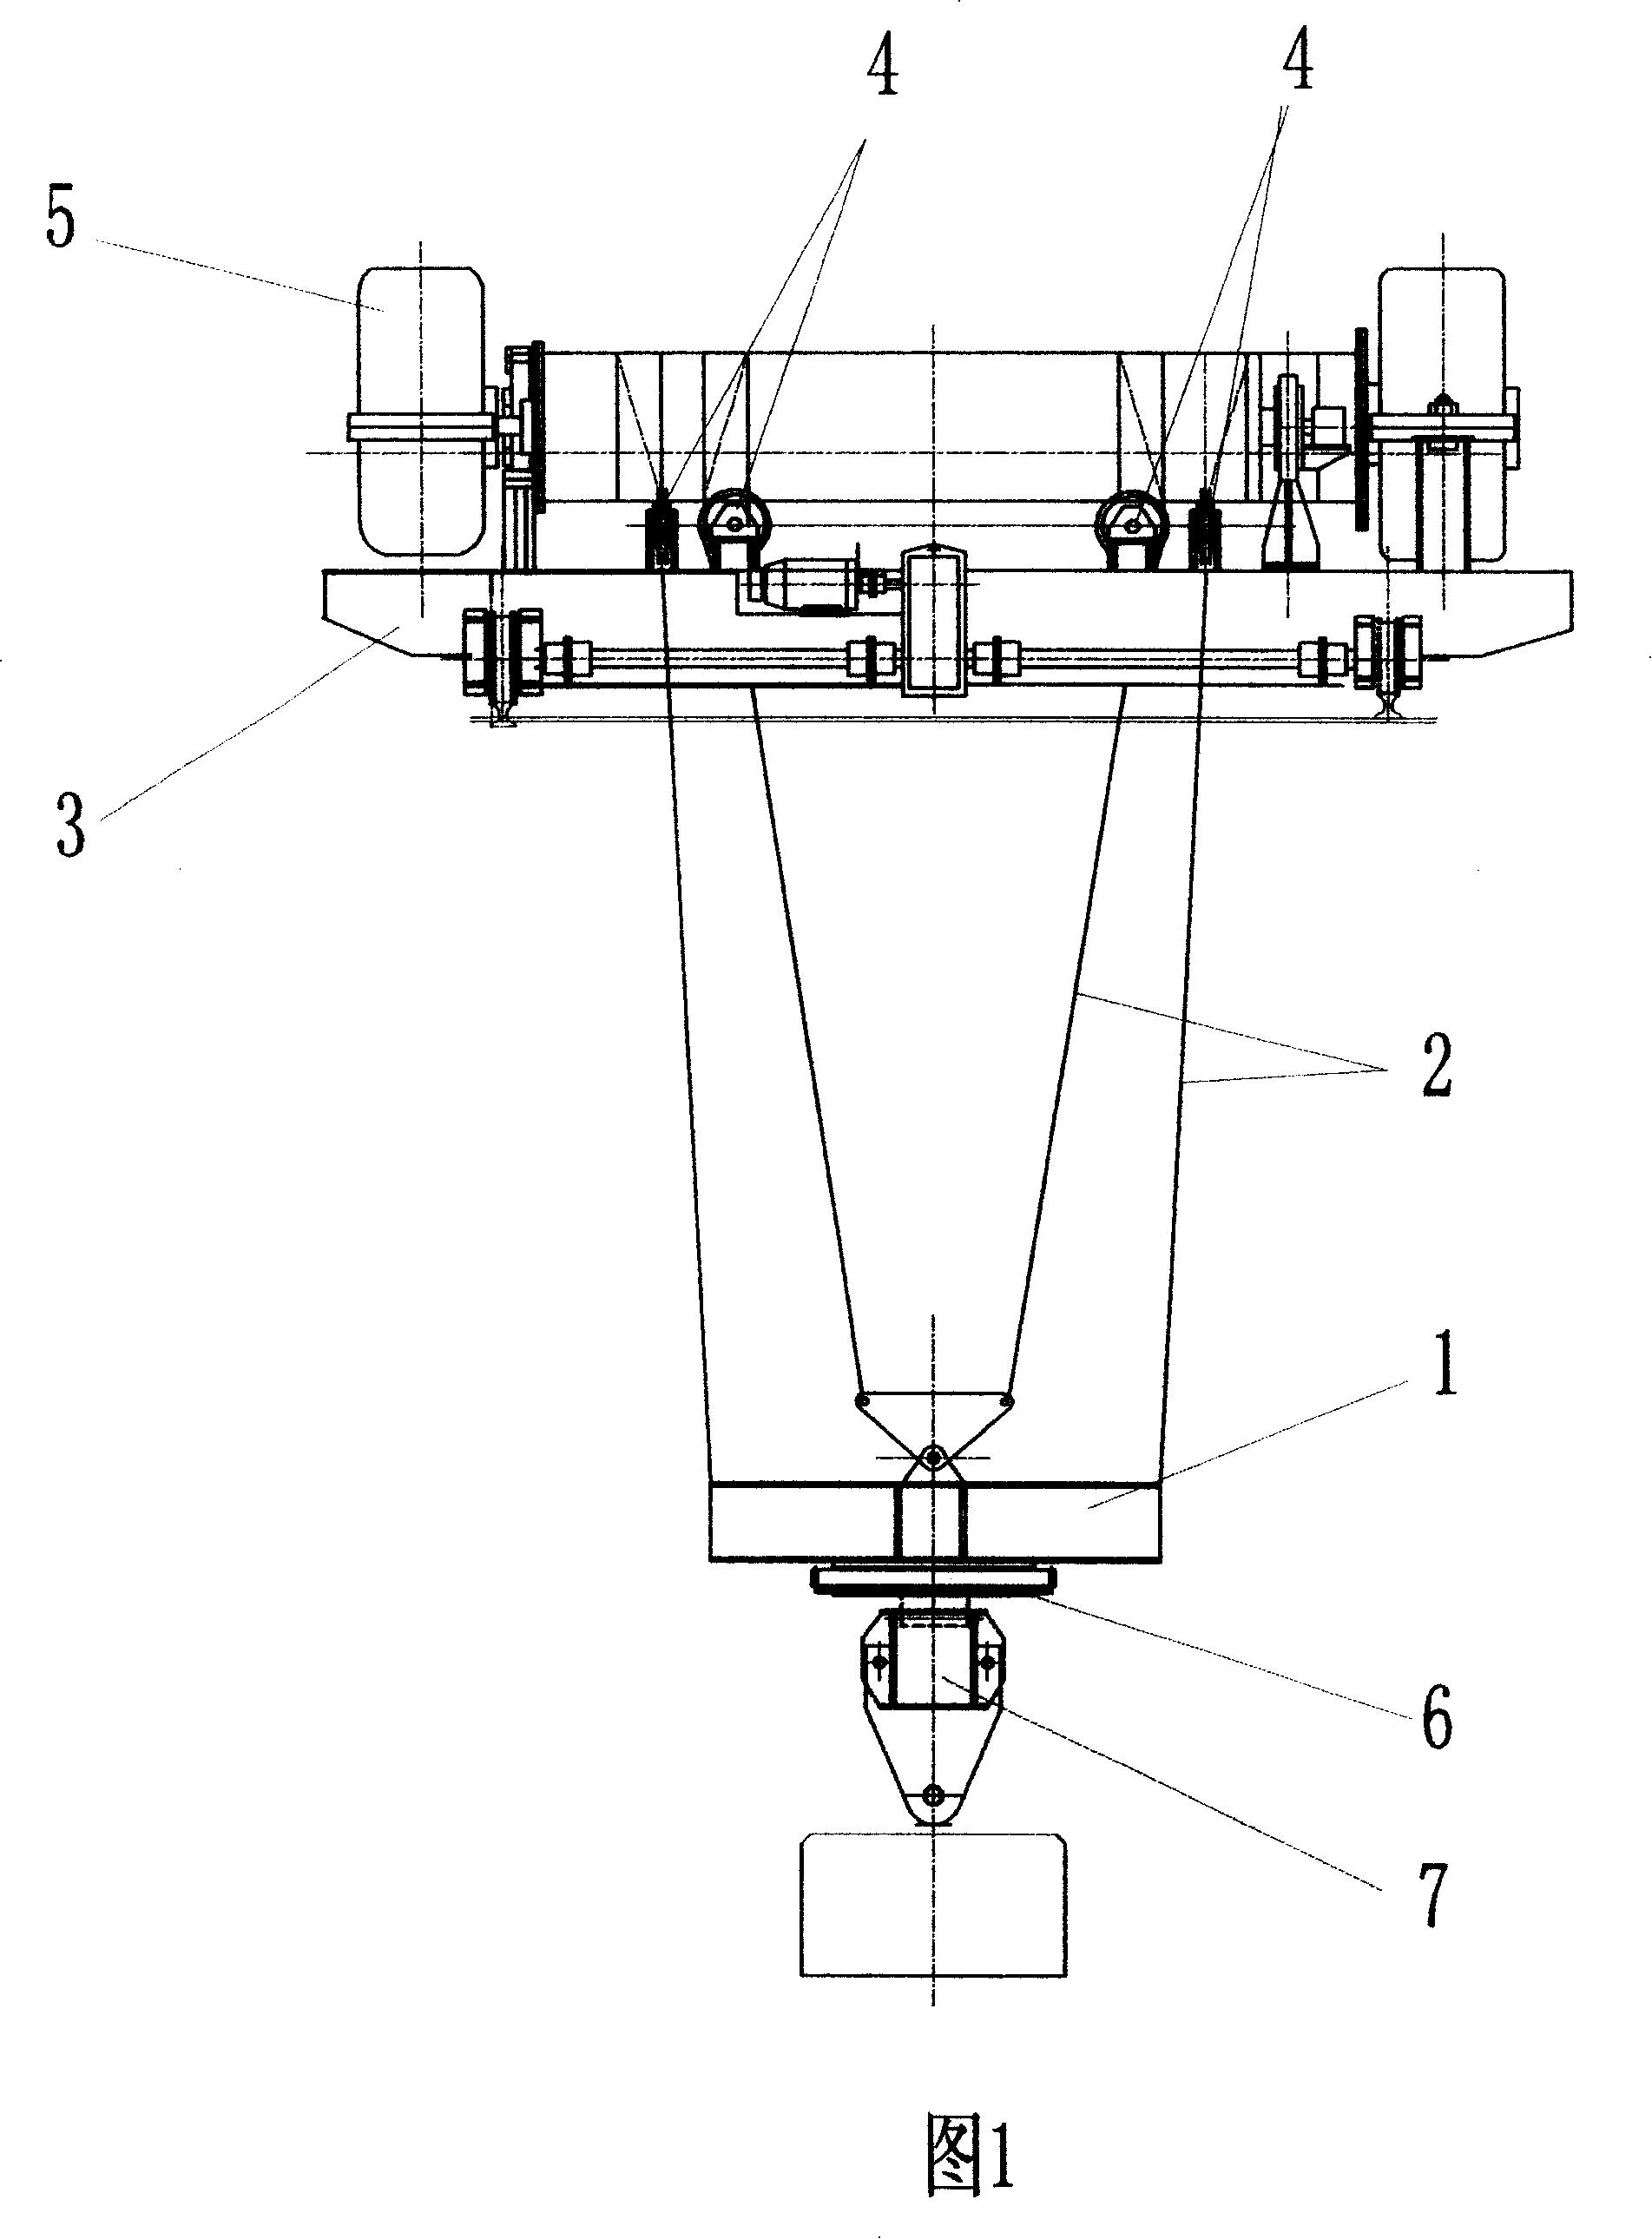 Guide and rotation mechanism for crane hanger